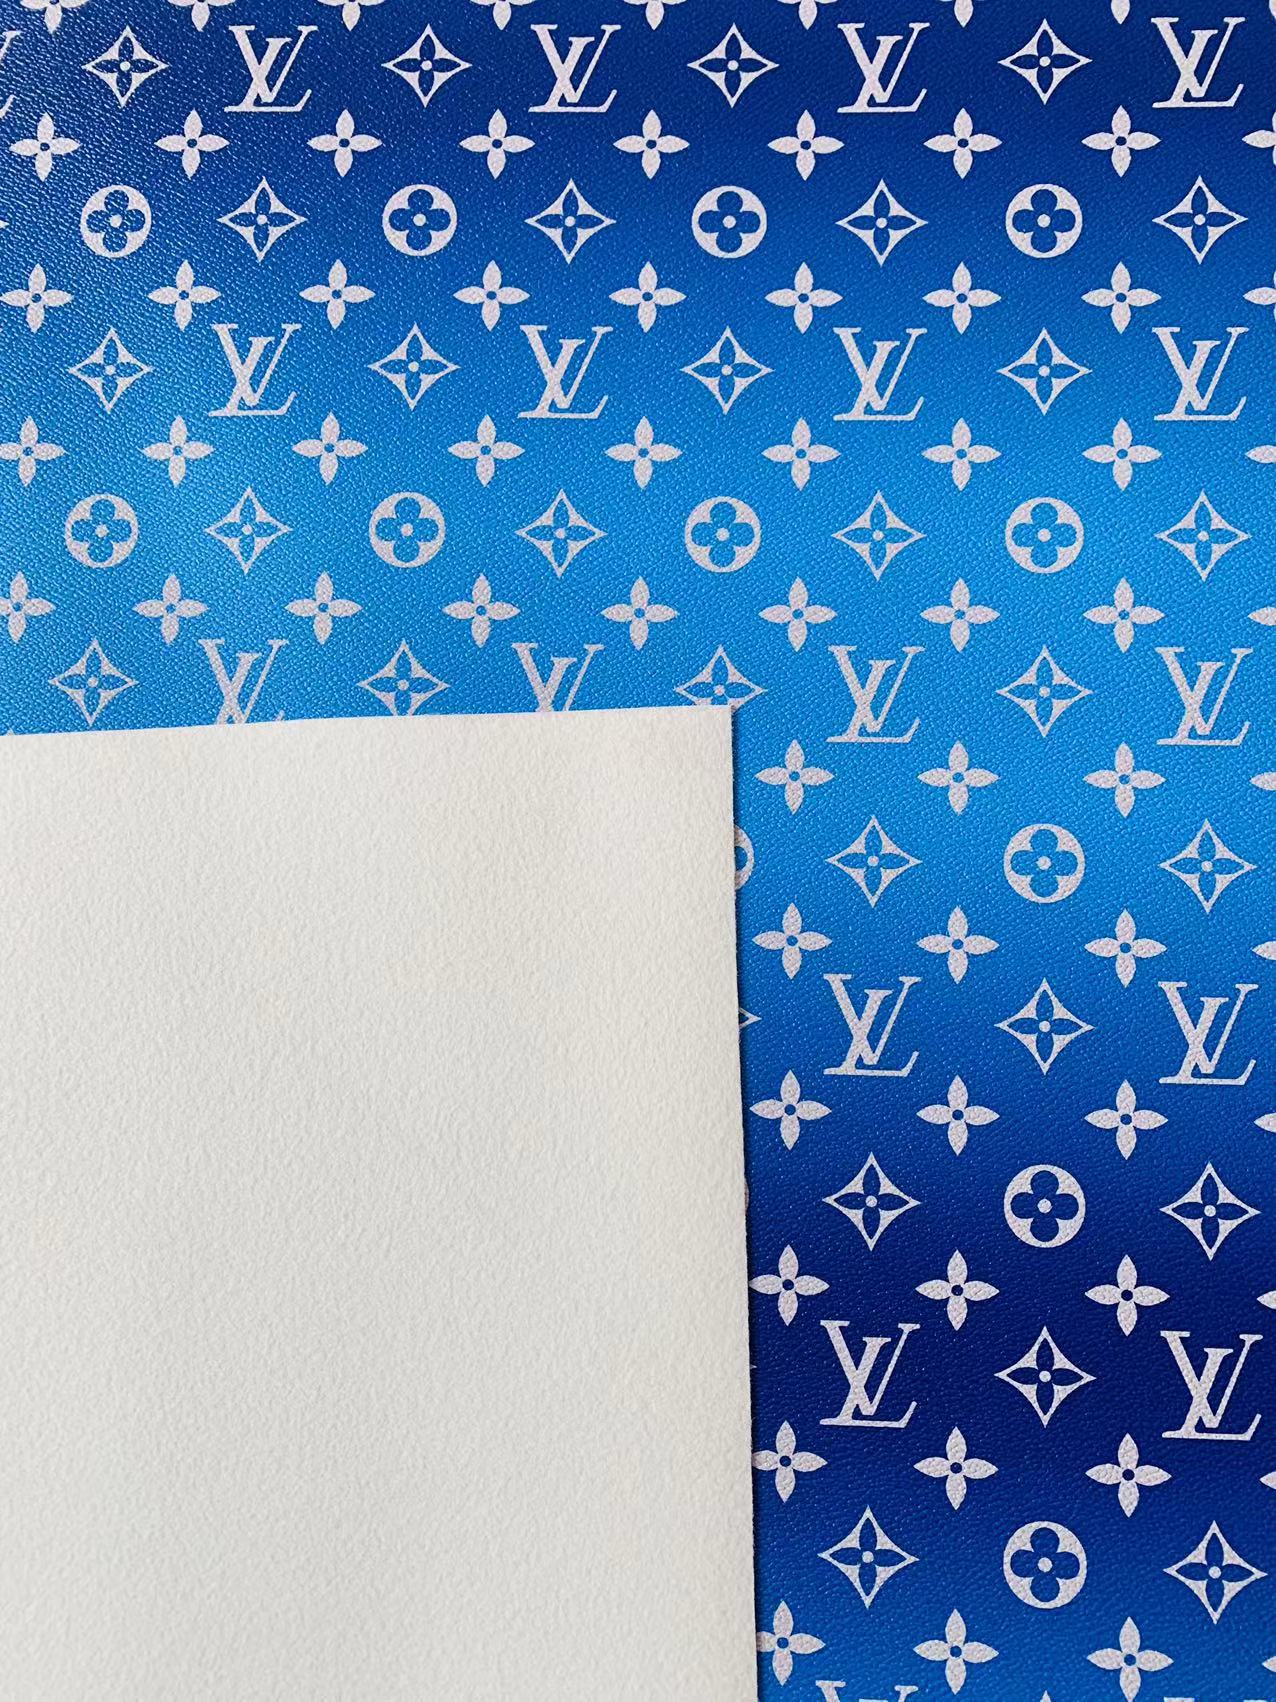 LV New Leather Fabric for sneakers